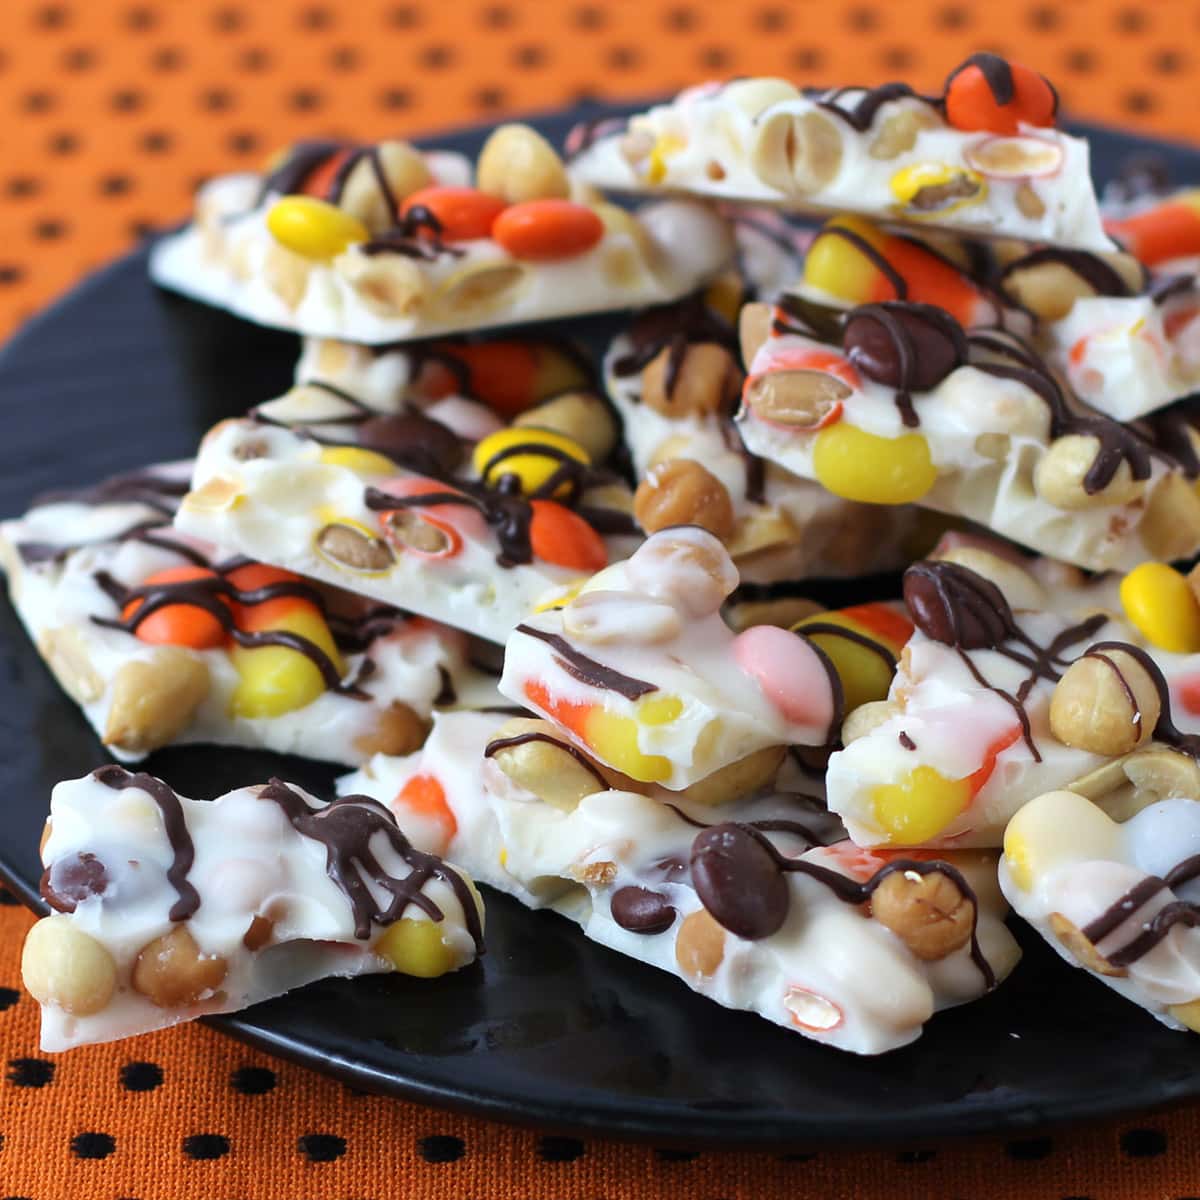 Candy Corn chocolate bark filled with peanuts, caramel, and Reese's Pieces.